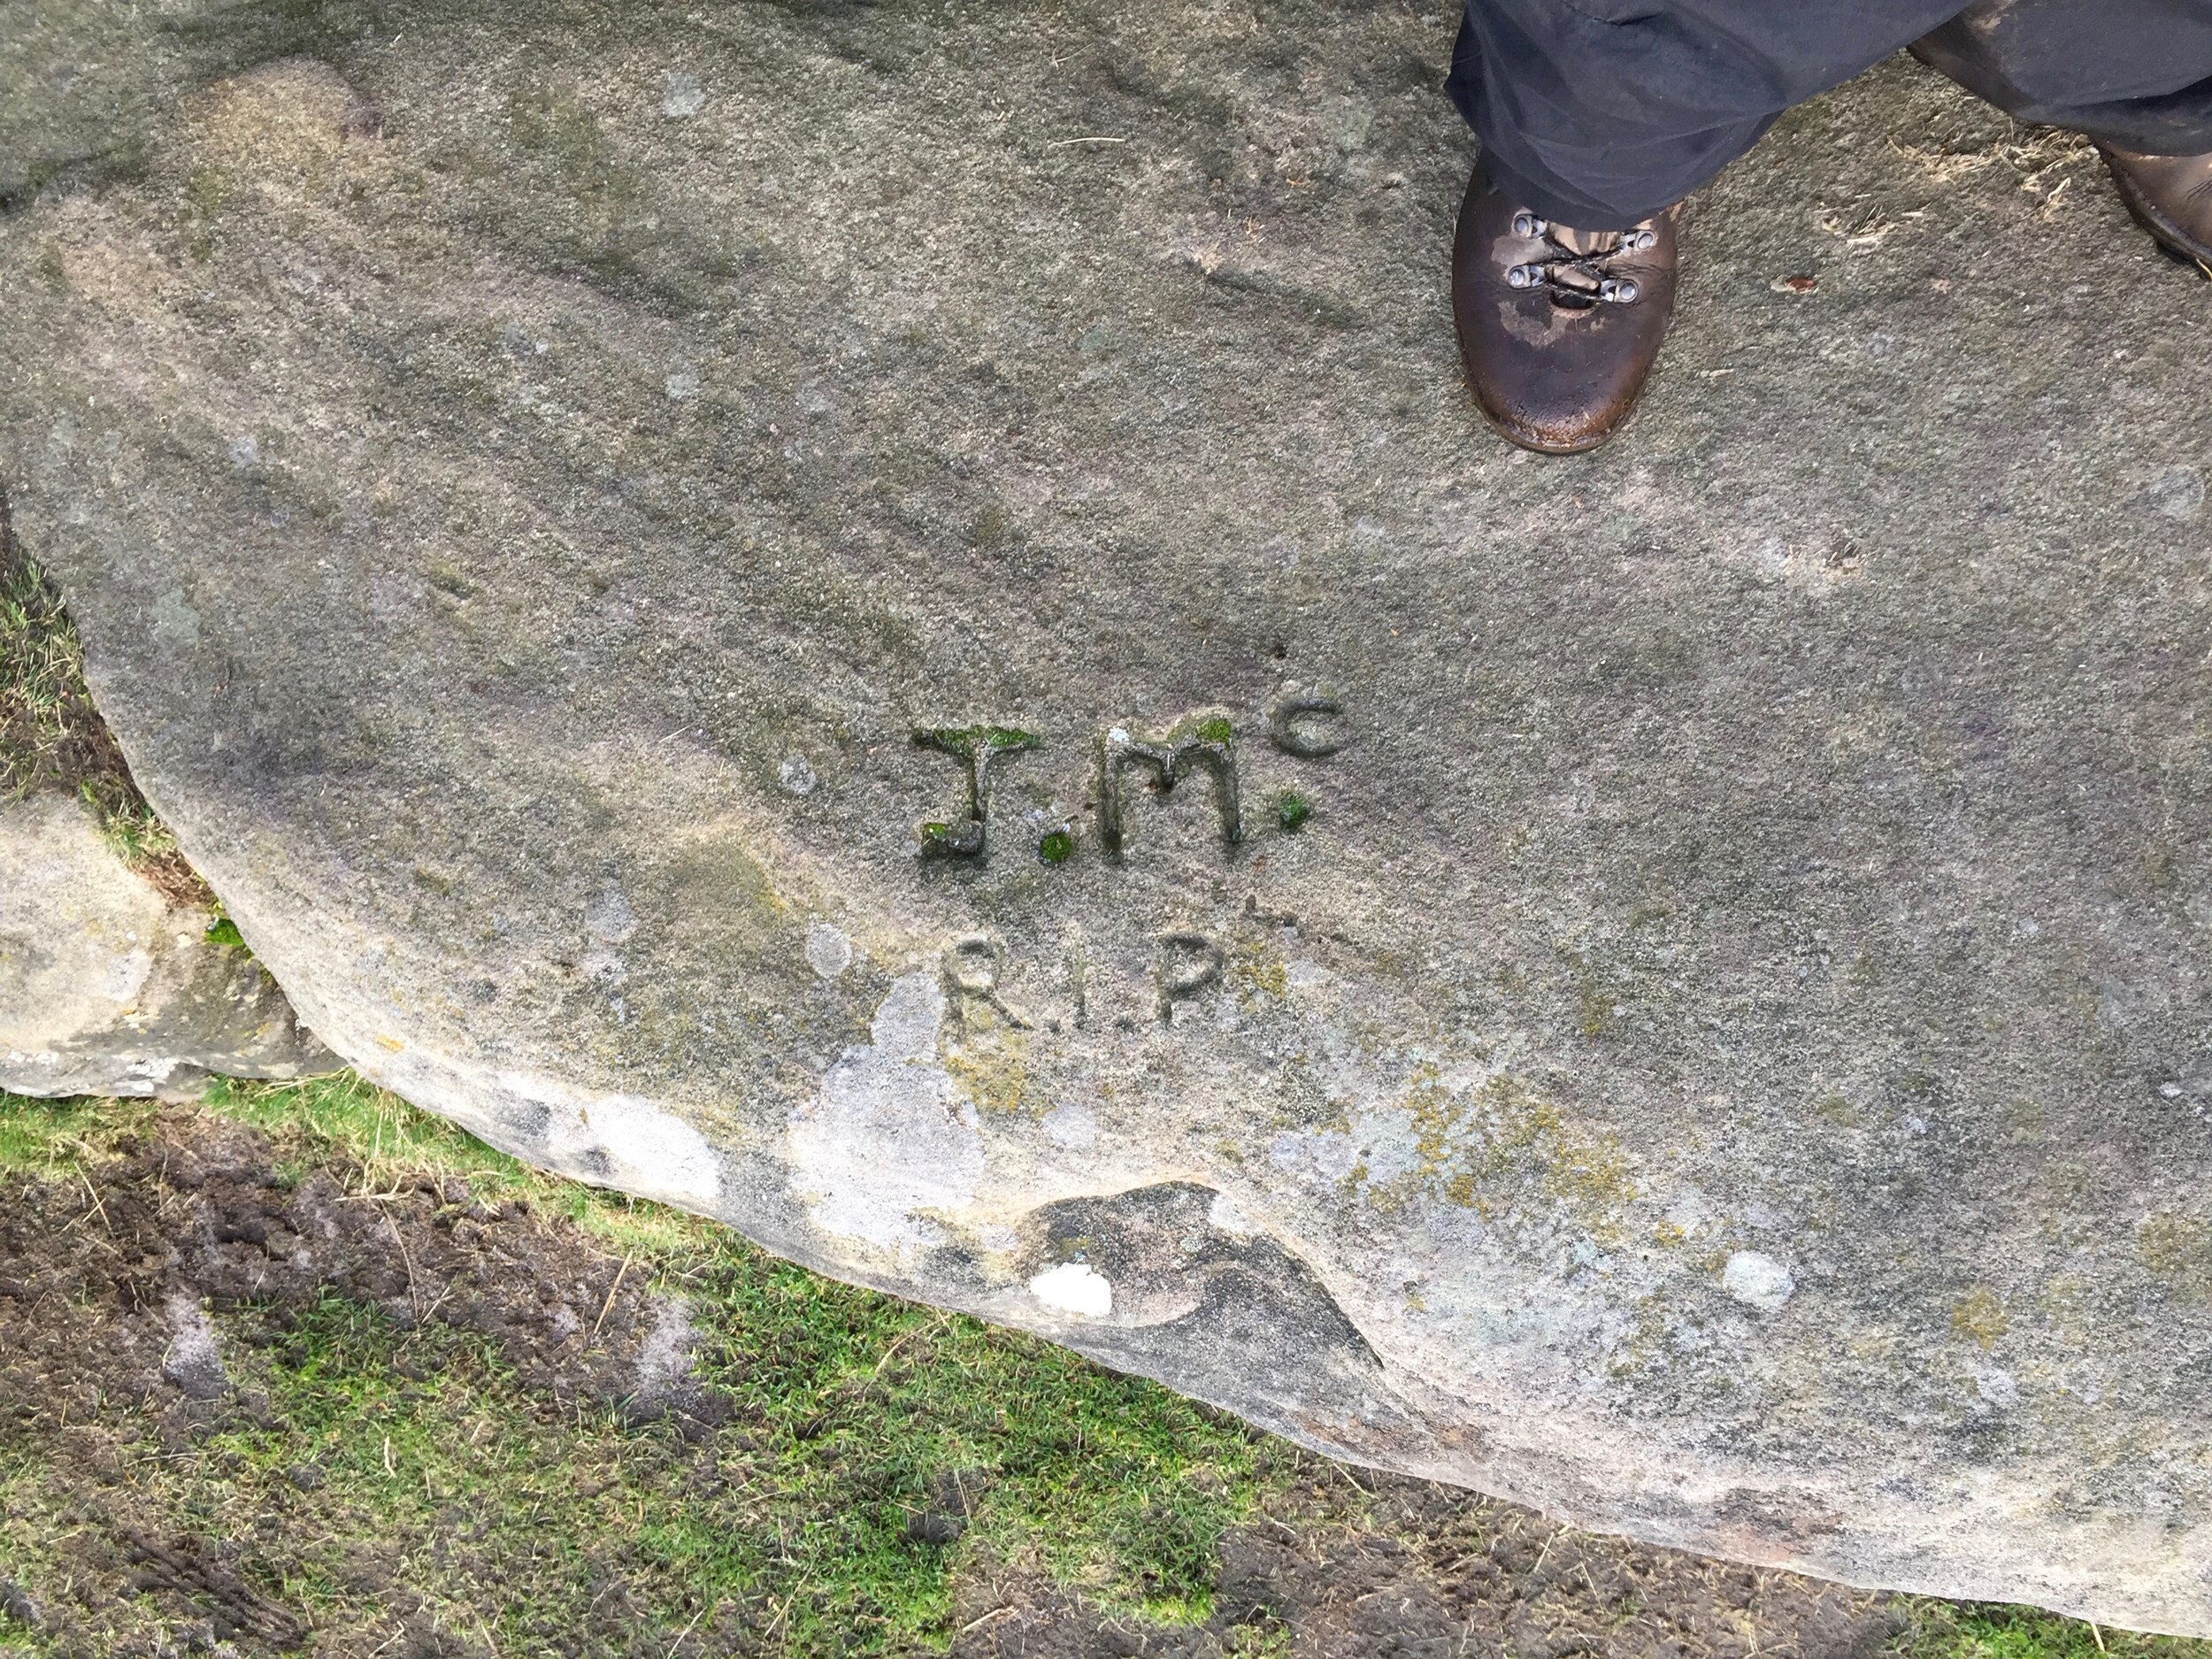  Looking down at my boots on one of the rocks, and the inscription, ‘J.Mc RIP’. 